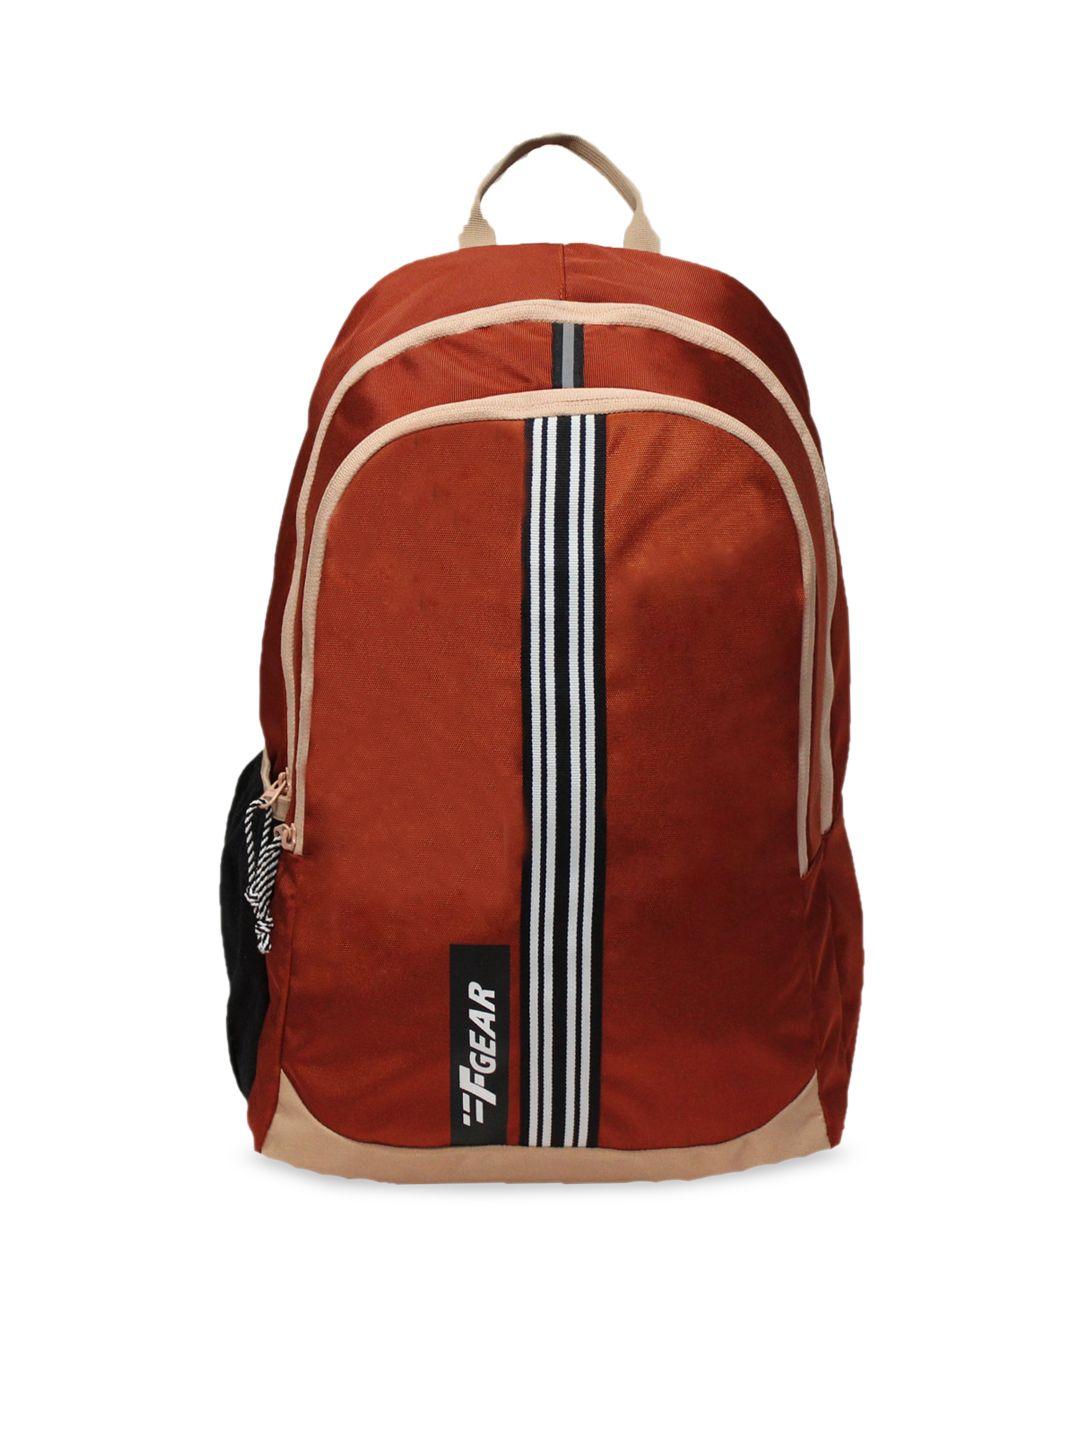 f gear unisex brown contrast detail backpack